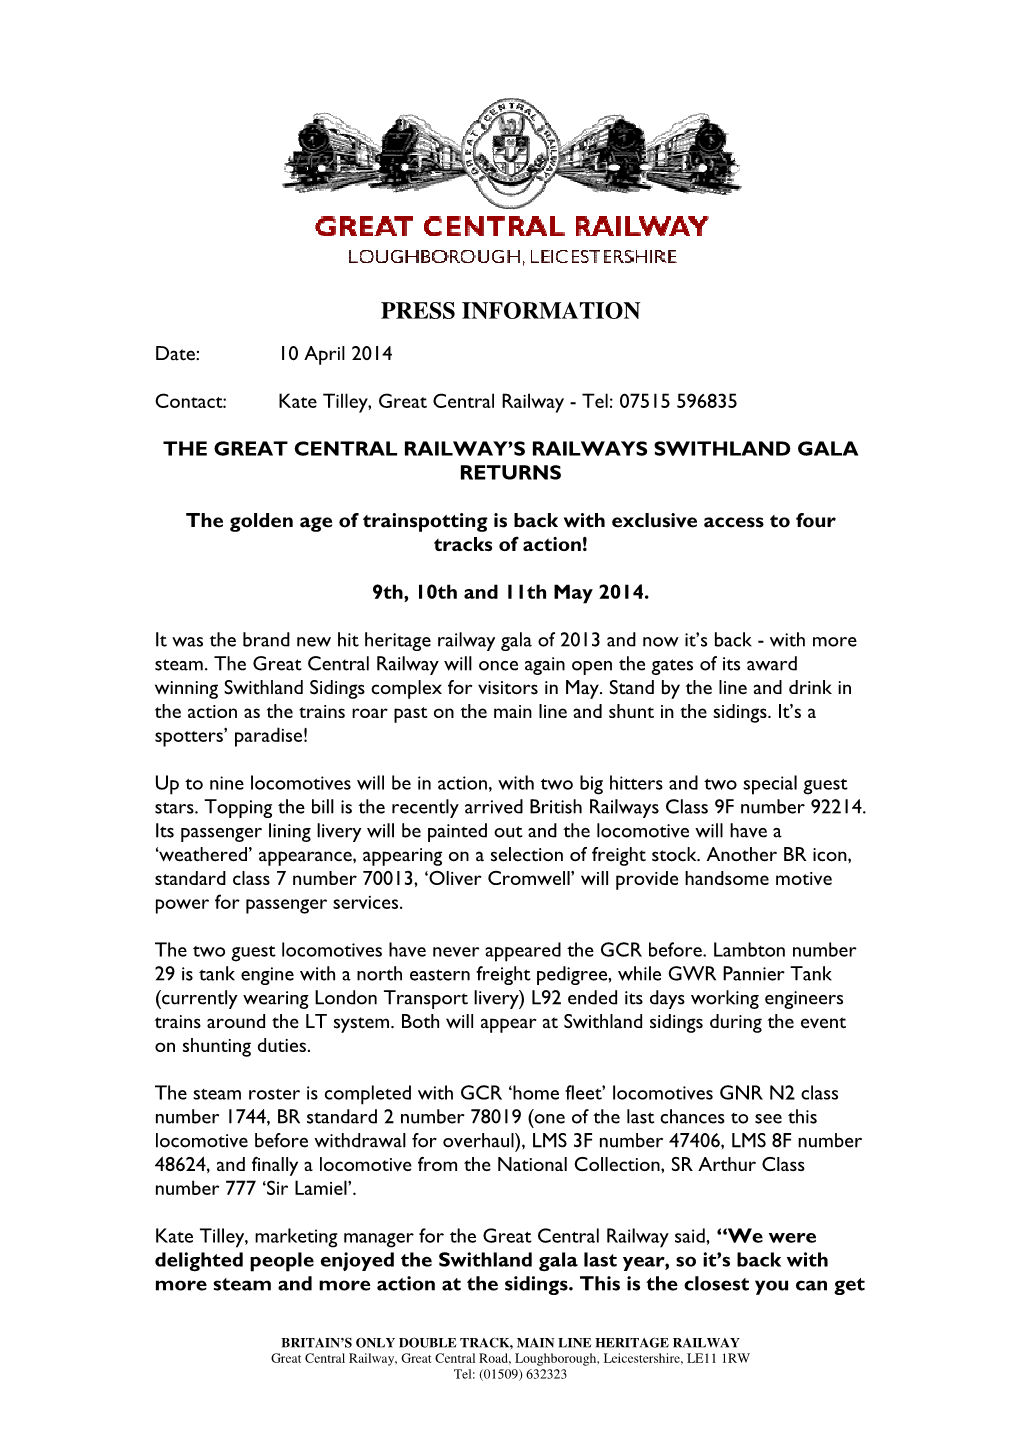 The Great Central Railway's Railways Swithland Gala Returns